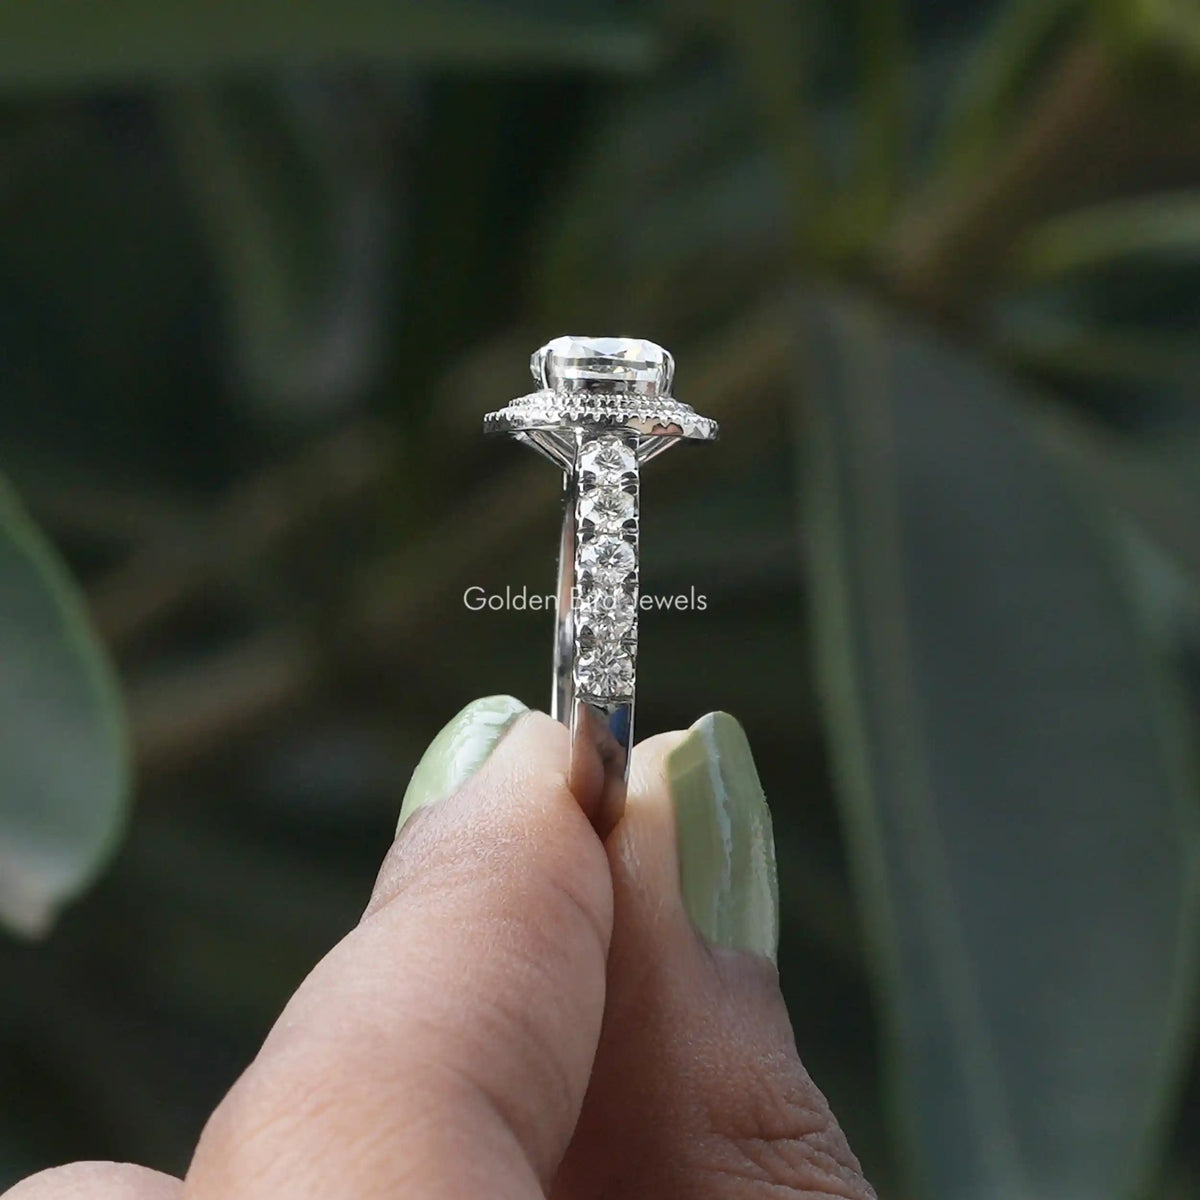 [Moissanite cushion cut halo ring made of prong setting]-[Golden Bird Jewels]